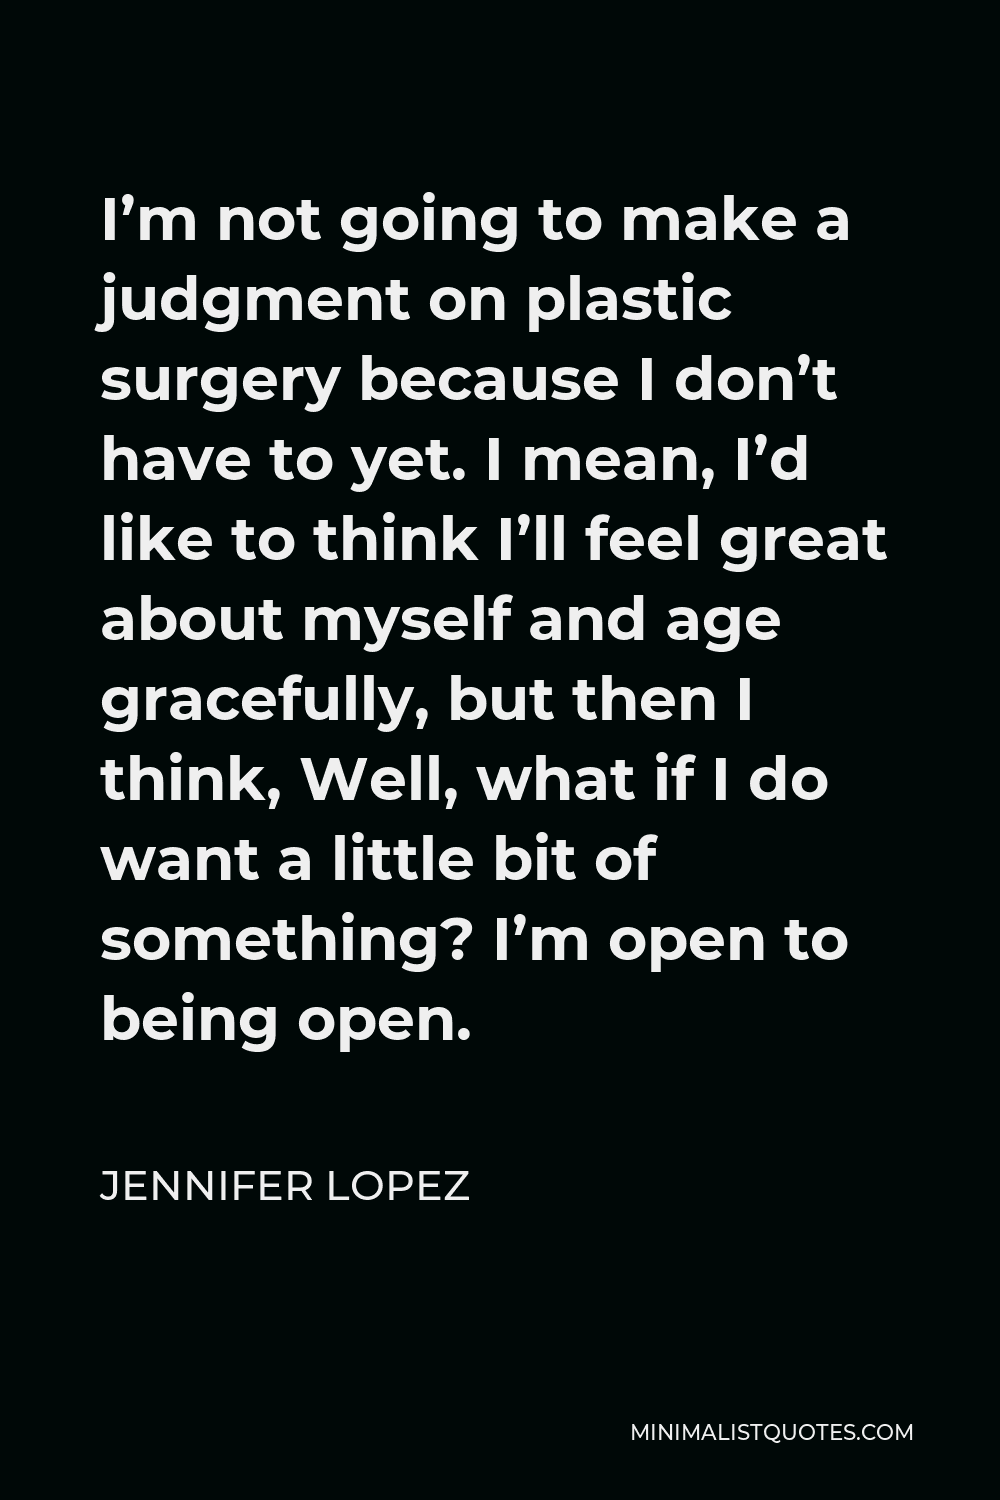 Jennifer Lopez Quote - I’m not going to make a judgment on plastic surgery because I don’t have to yet. I mean, I’d like to think I’ll feel great about myself and age gracefully, but then I think, Well, what if I do want a little bit of something? I’m open to being open.